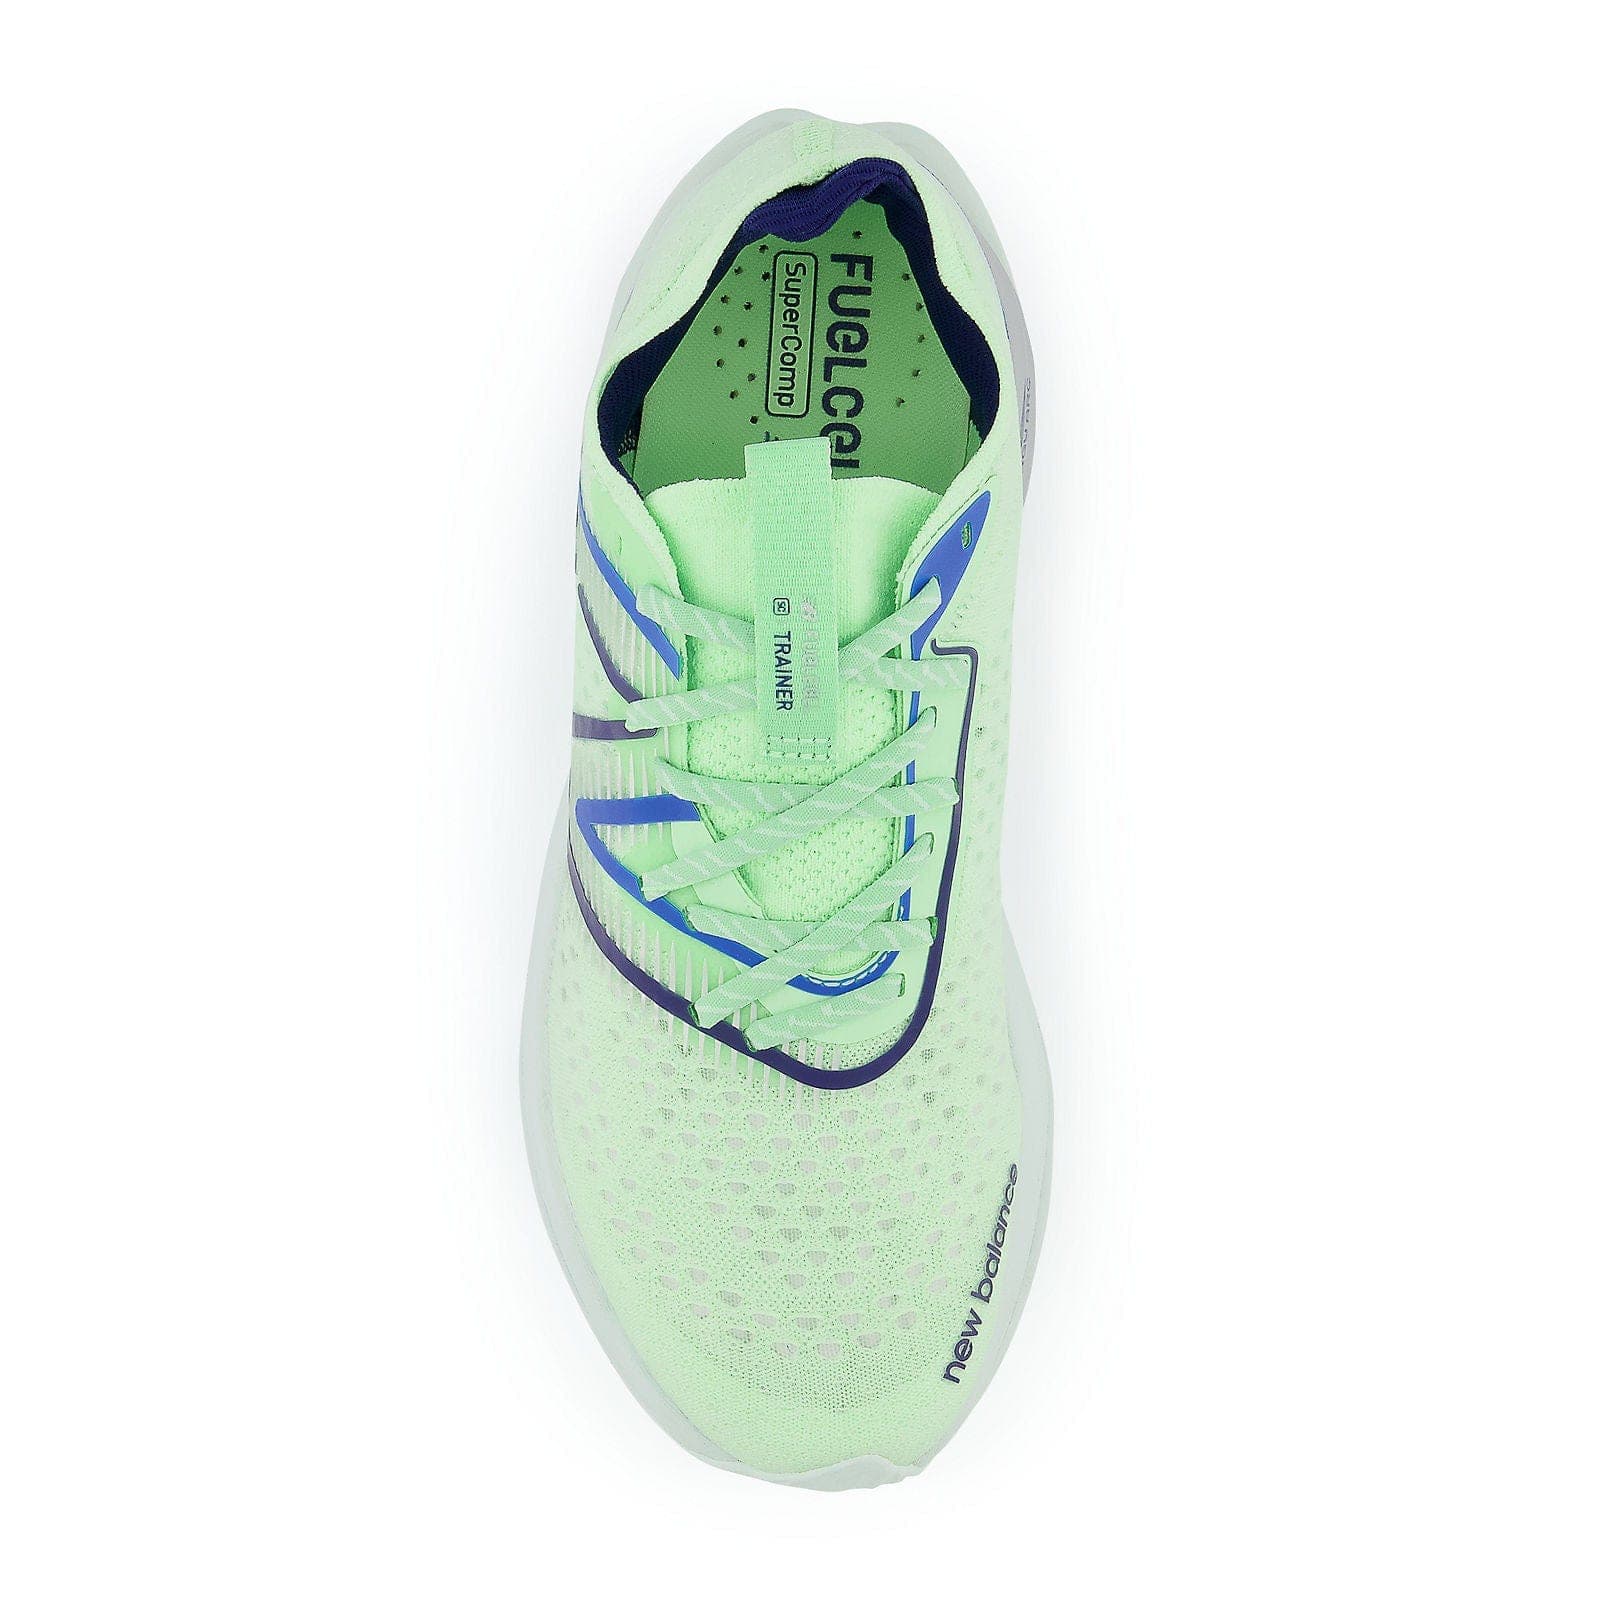 New Balance FuelCell SuperComp Trainer - Vibrant spring glo with victory blue and vibrant apricot